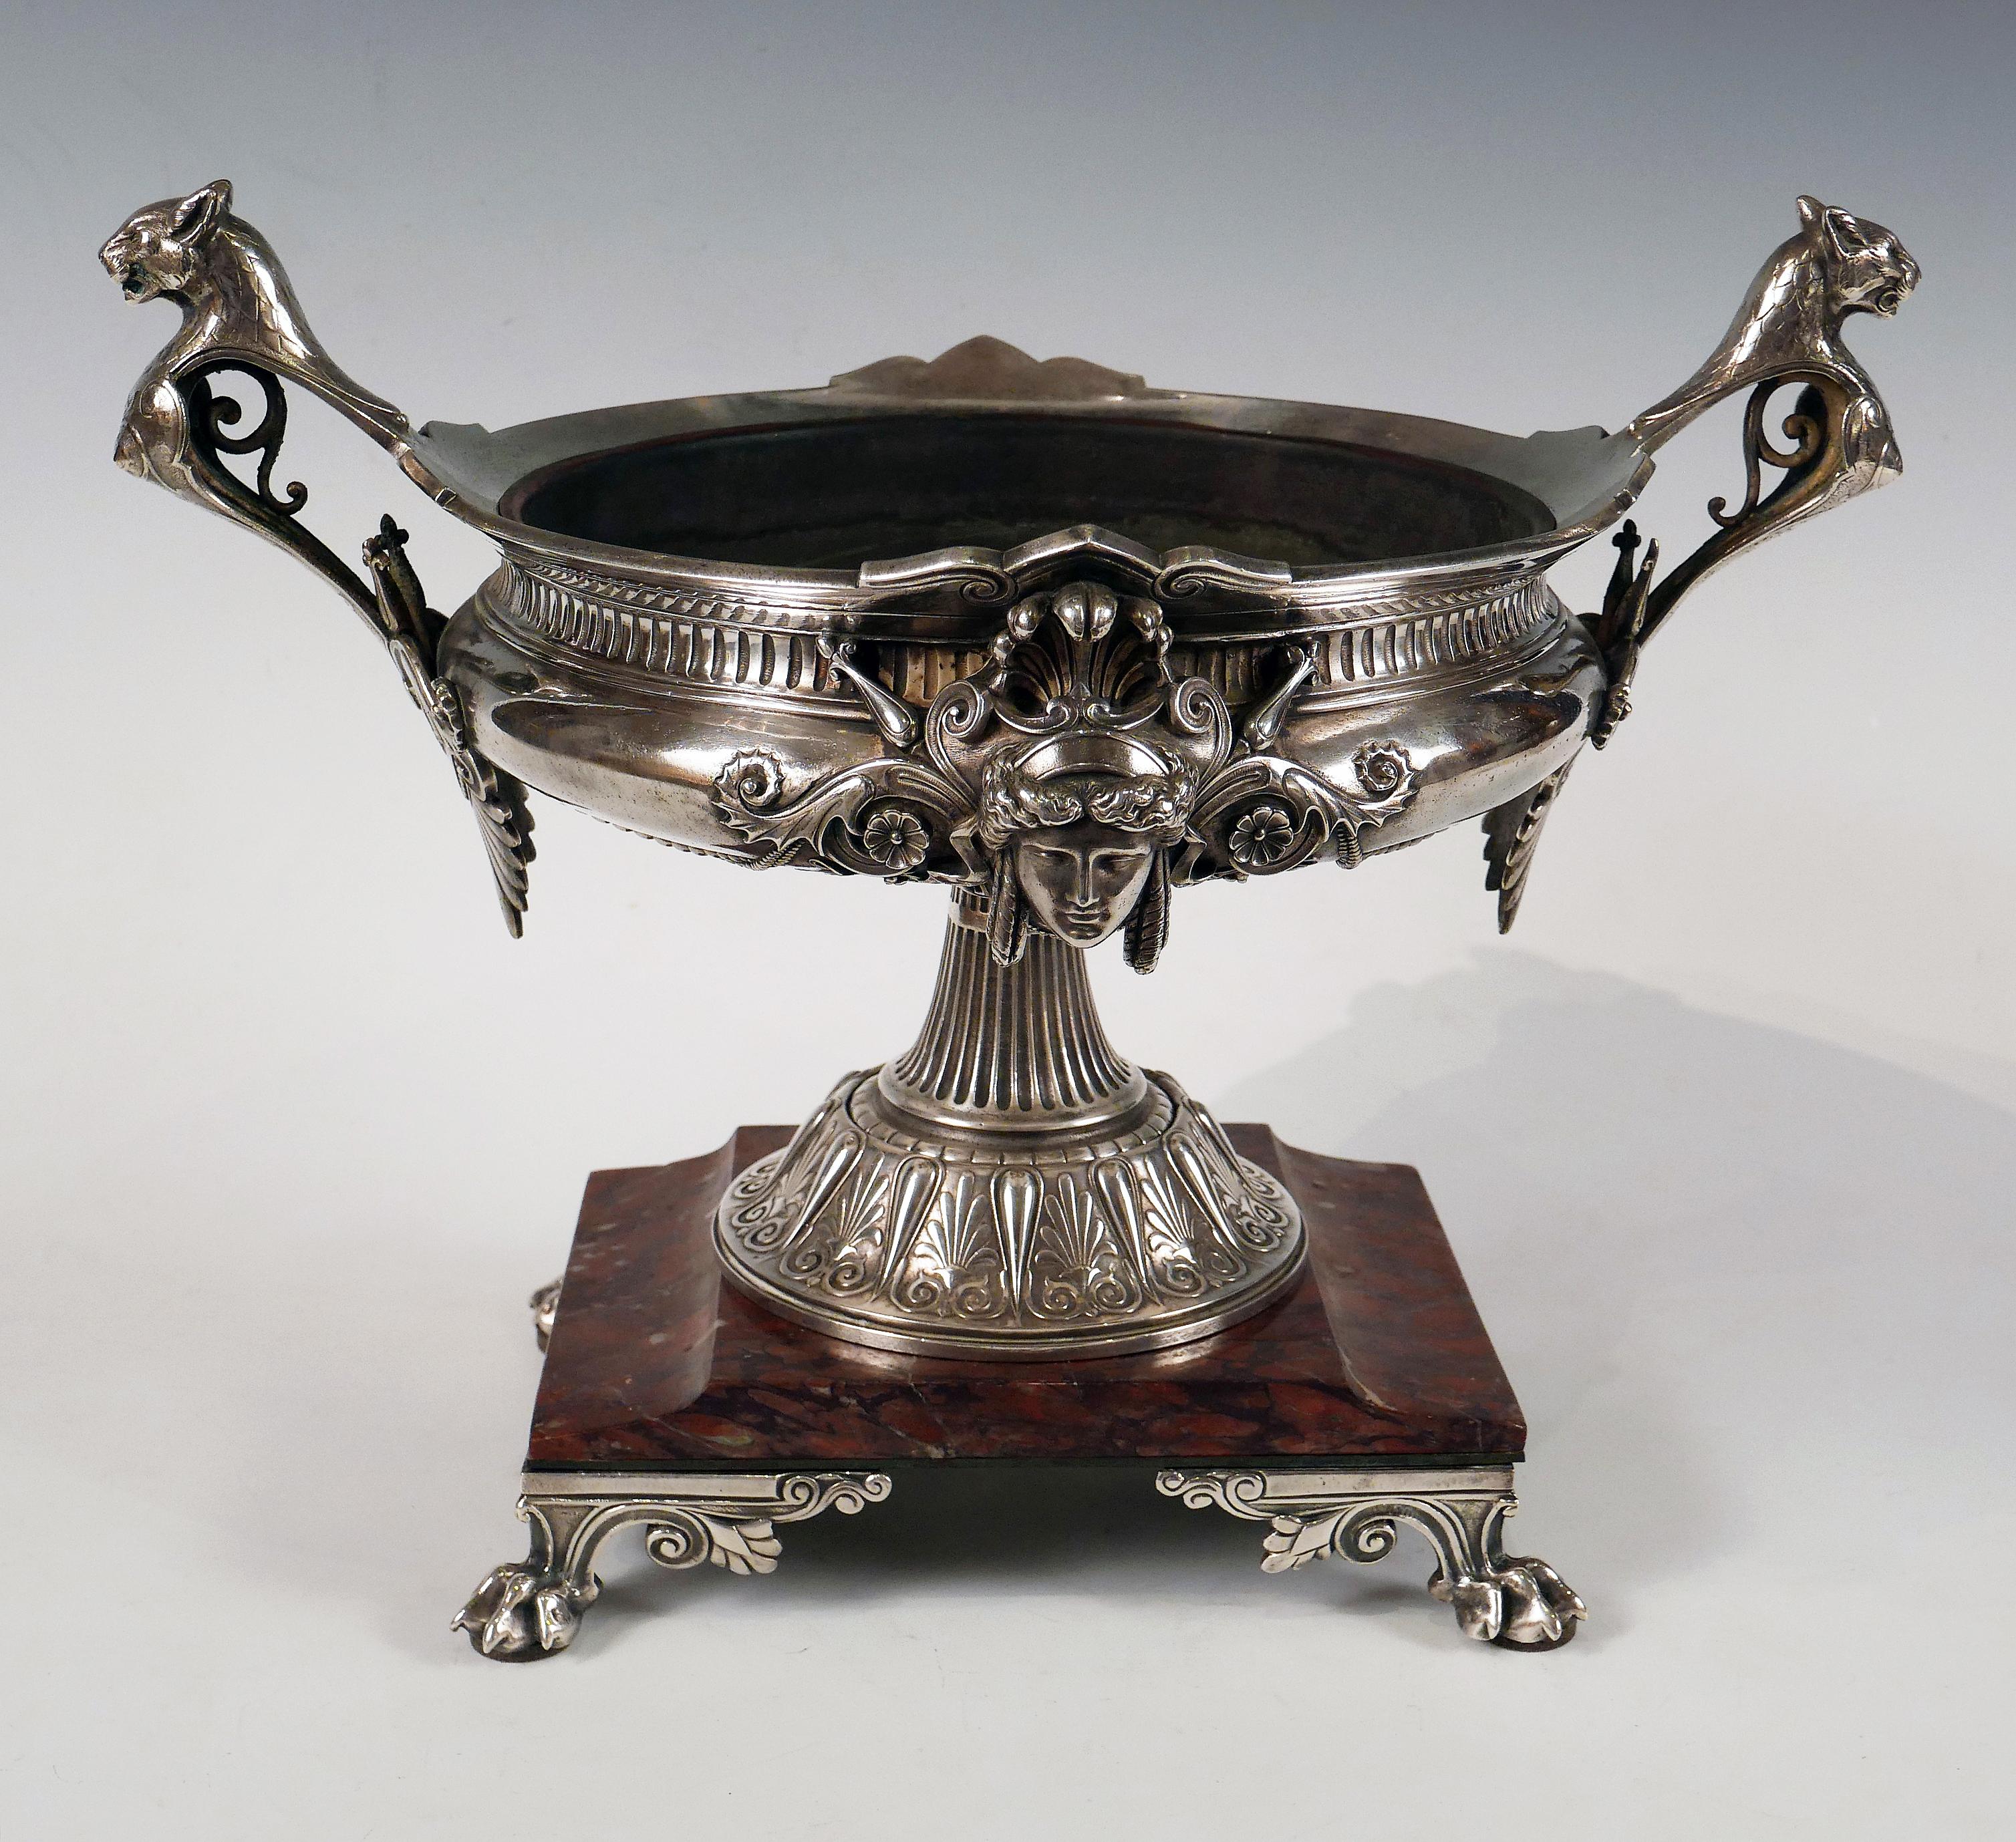 Beautiful silvered bronze neo-Greek style bowl in a circular shape, adorned on the body with female masks in the antique style and on the sides with handles in the shape of busts of lionesses ending in palmettes. The fluted pedestal is surrounded by